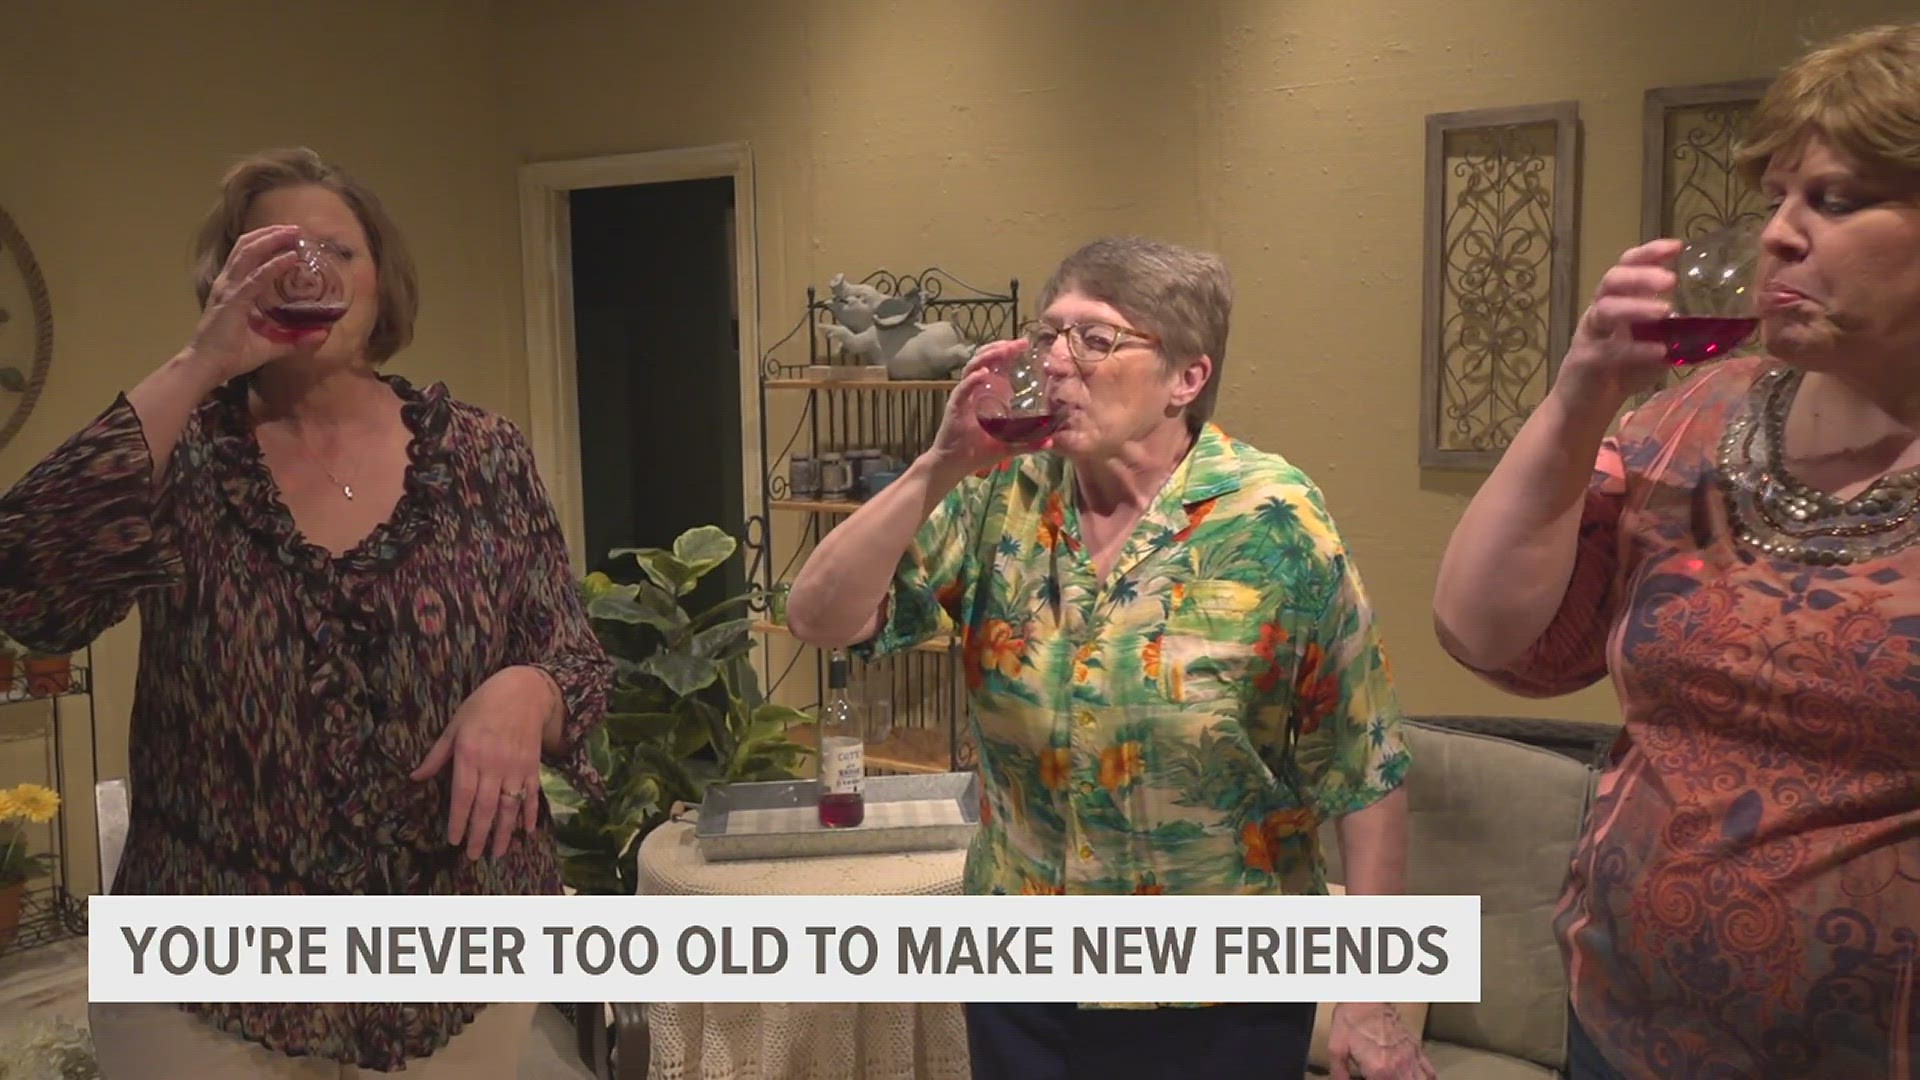 Writers from shows including 'Golden Girls' and 'Designing Women' wrote this comedic play now on stage at Oyster Mill Playhouse in Cumberland County.